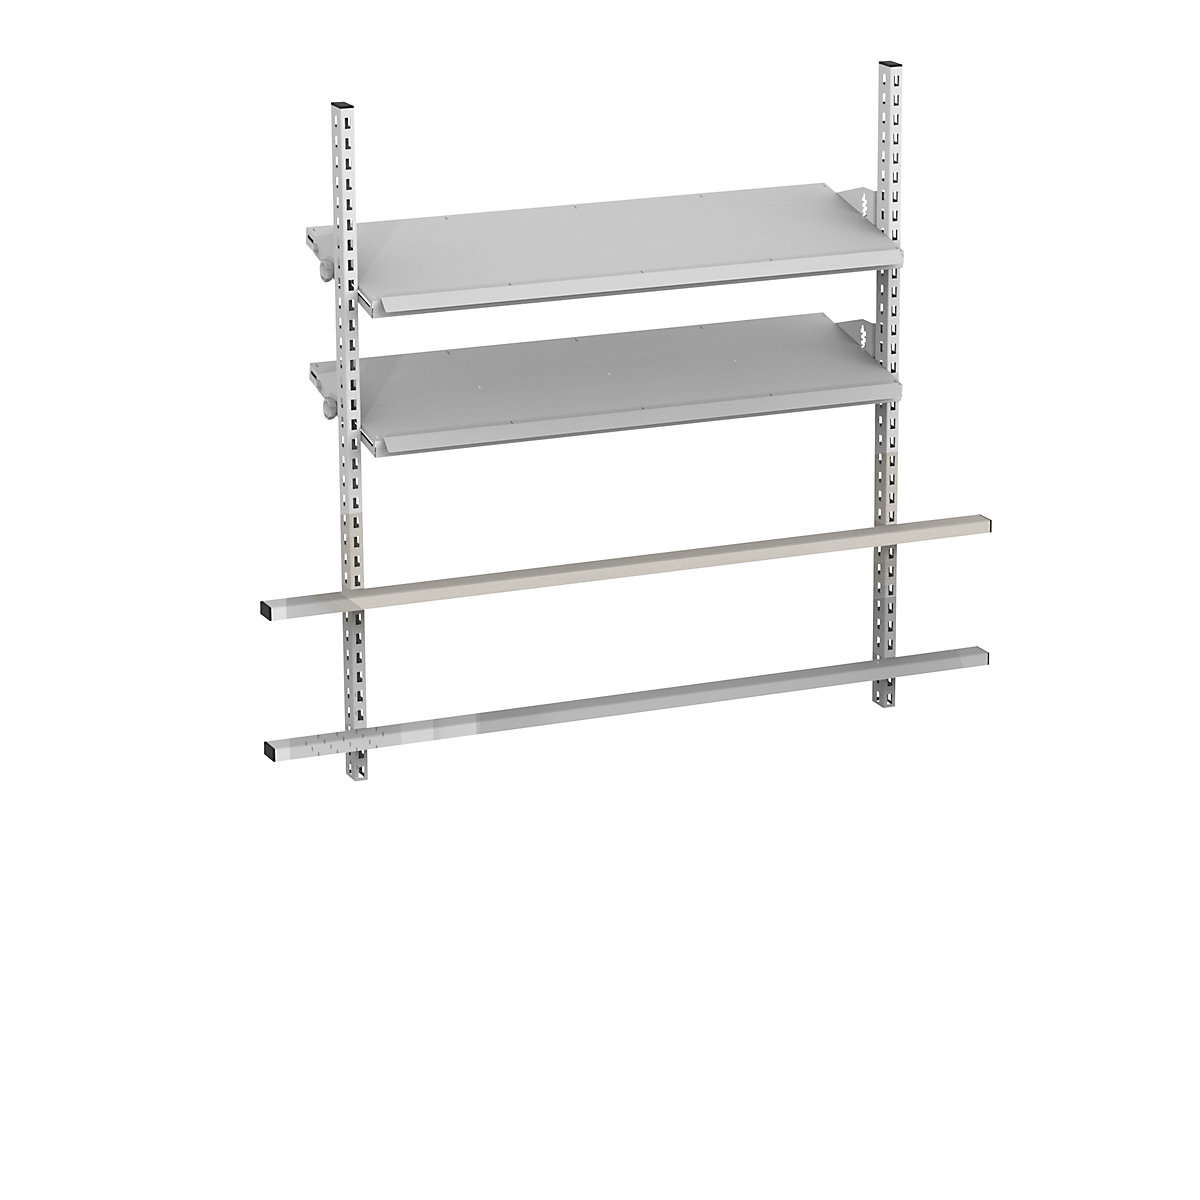 Add-on for table with inclined shelves (Product illustration 2)-1